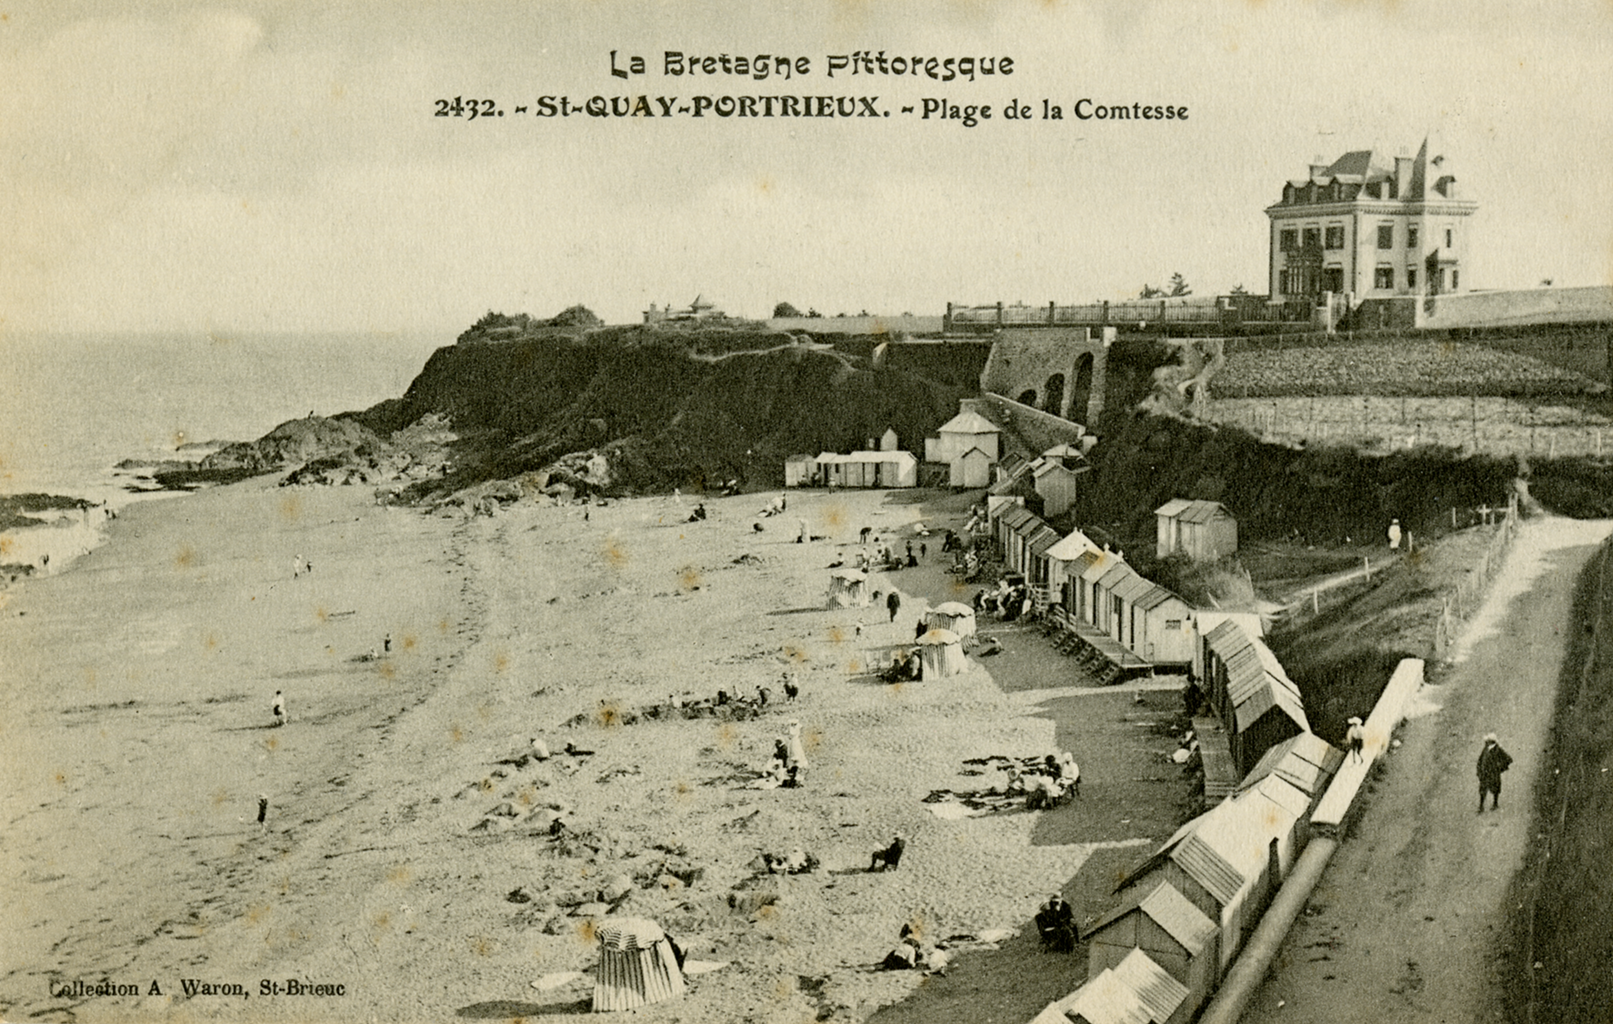 A black and white photograph showing people scattered across the shore of a beach surrounded by small bathing cabins. On the right side of the photograph ther is a road leading to the top of the cliff which rests a white manor. Written at the top of the image is &ldquo;La Bretagne Pittoresque 2432. ~St~QUAY~PORTIEUX. ~ Plage de la Comtesse.&rdquo;